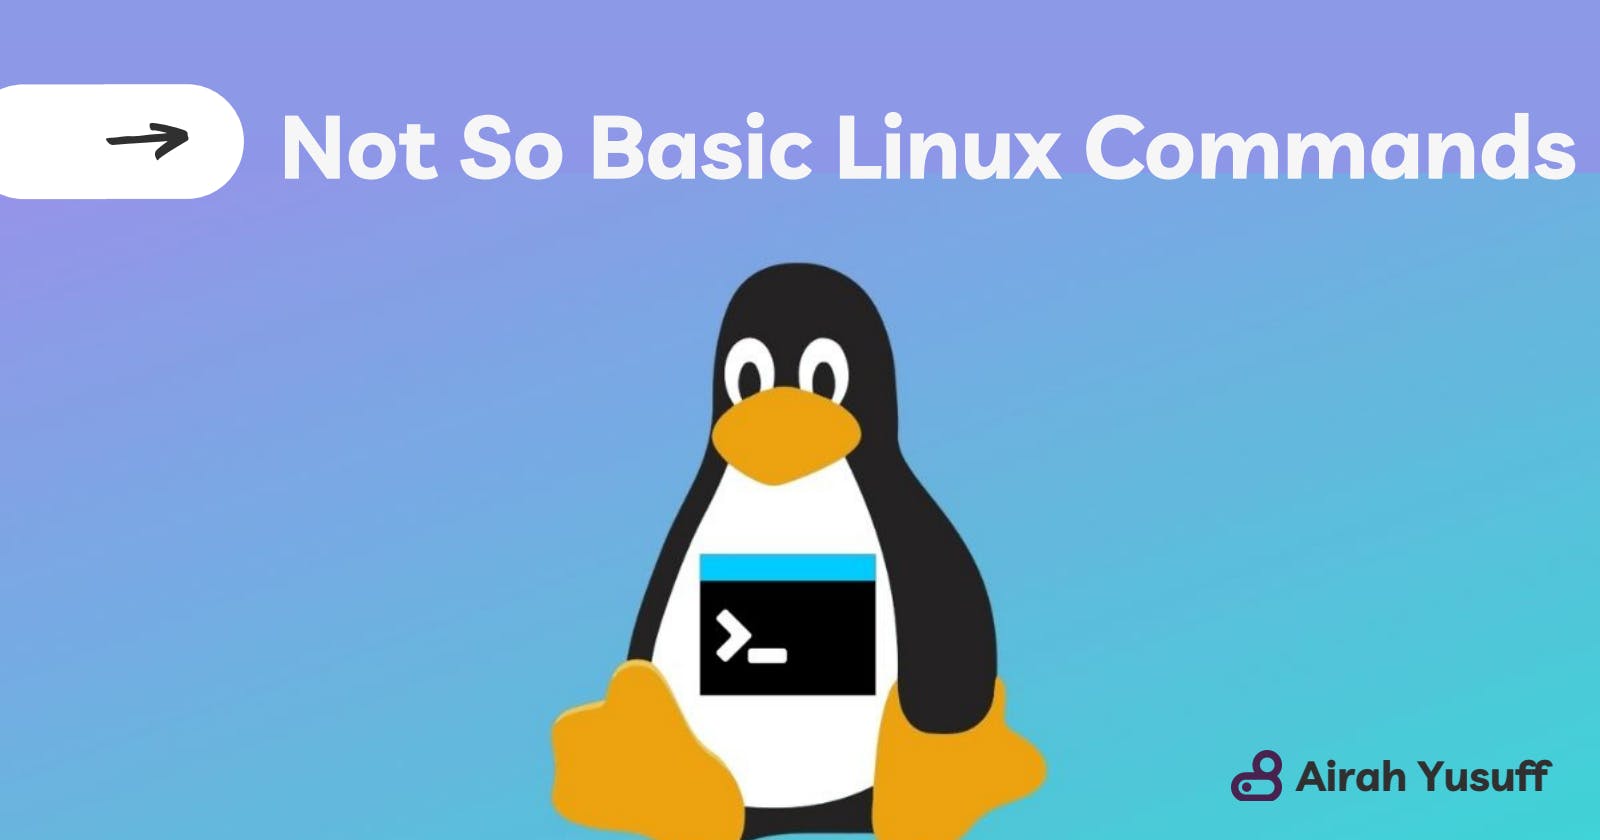 The Not-So-Basic Linux Commands I Have Learnt So Far